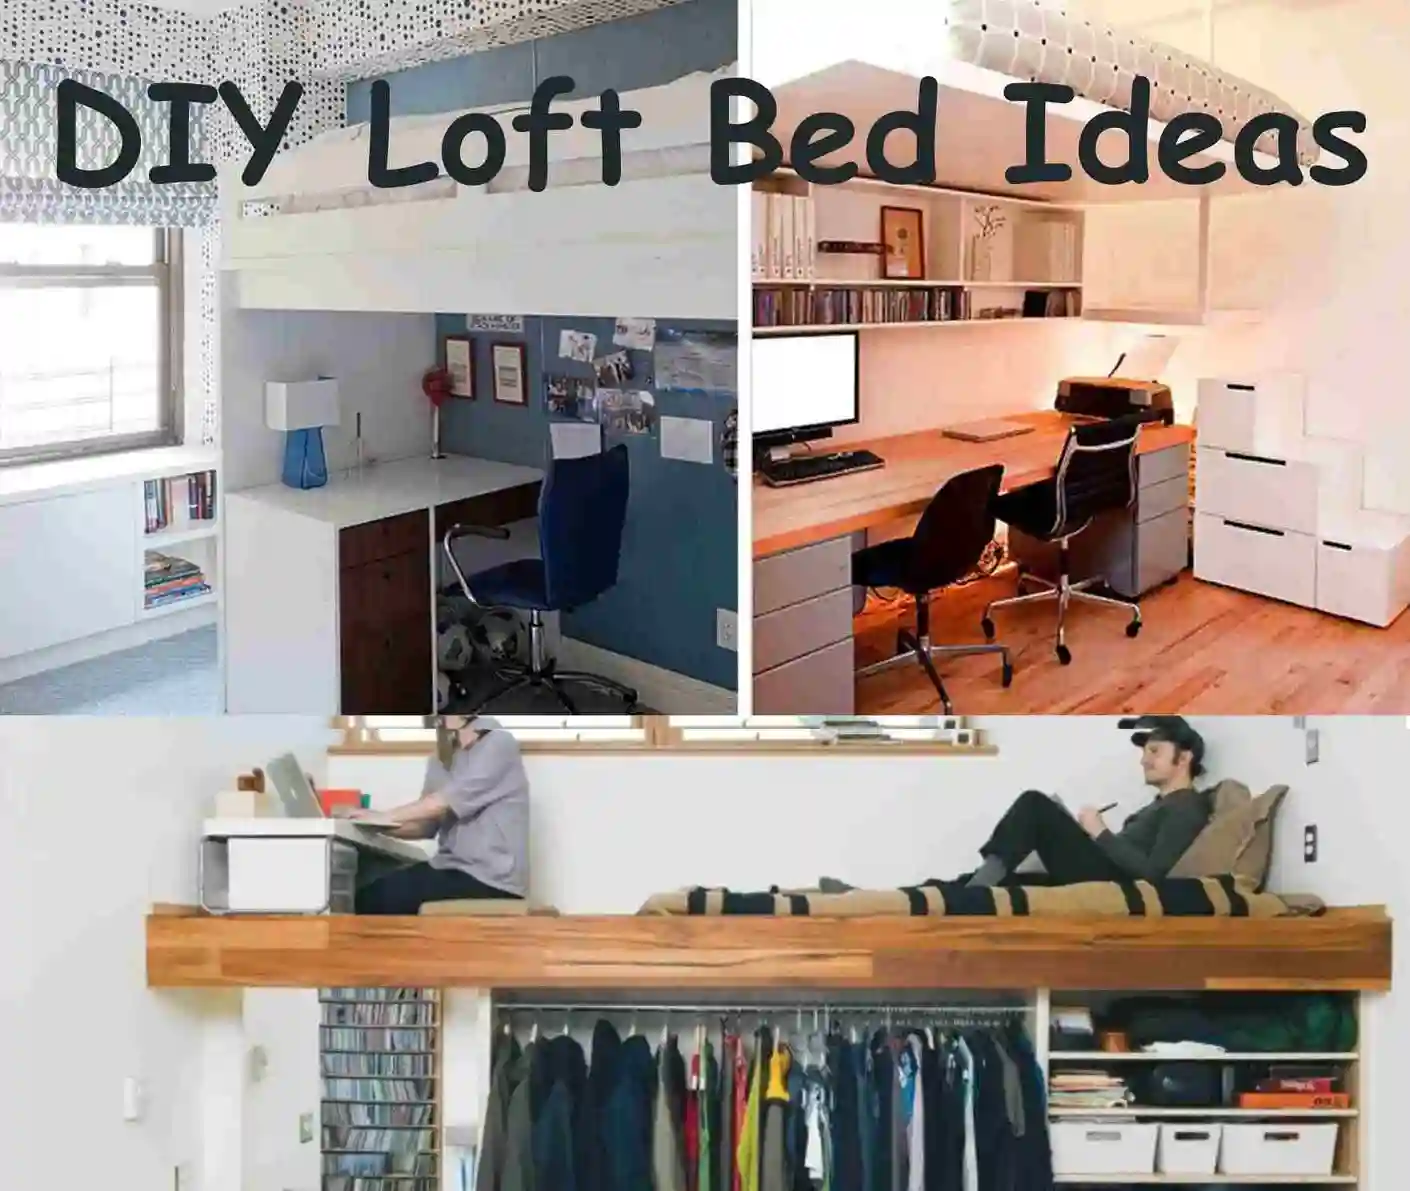 DIY Loft Bed Ideas for Small Rooms